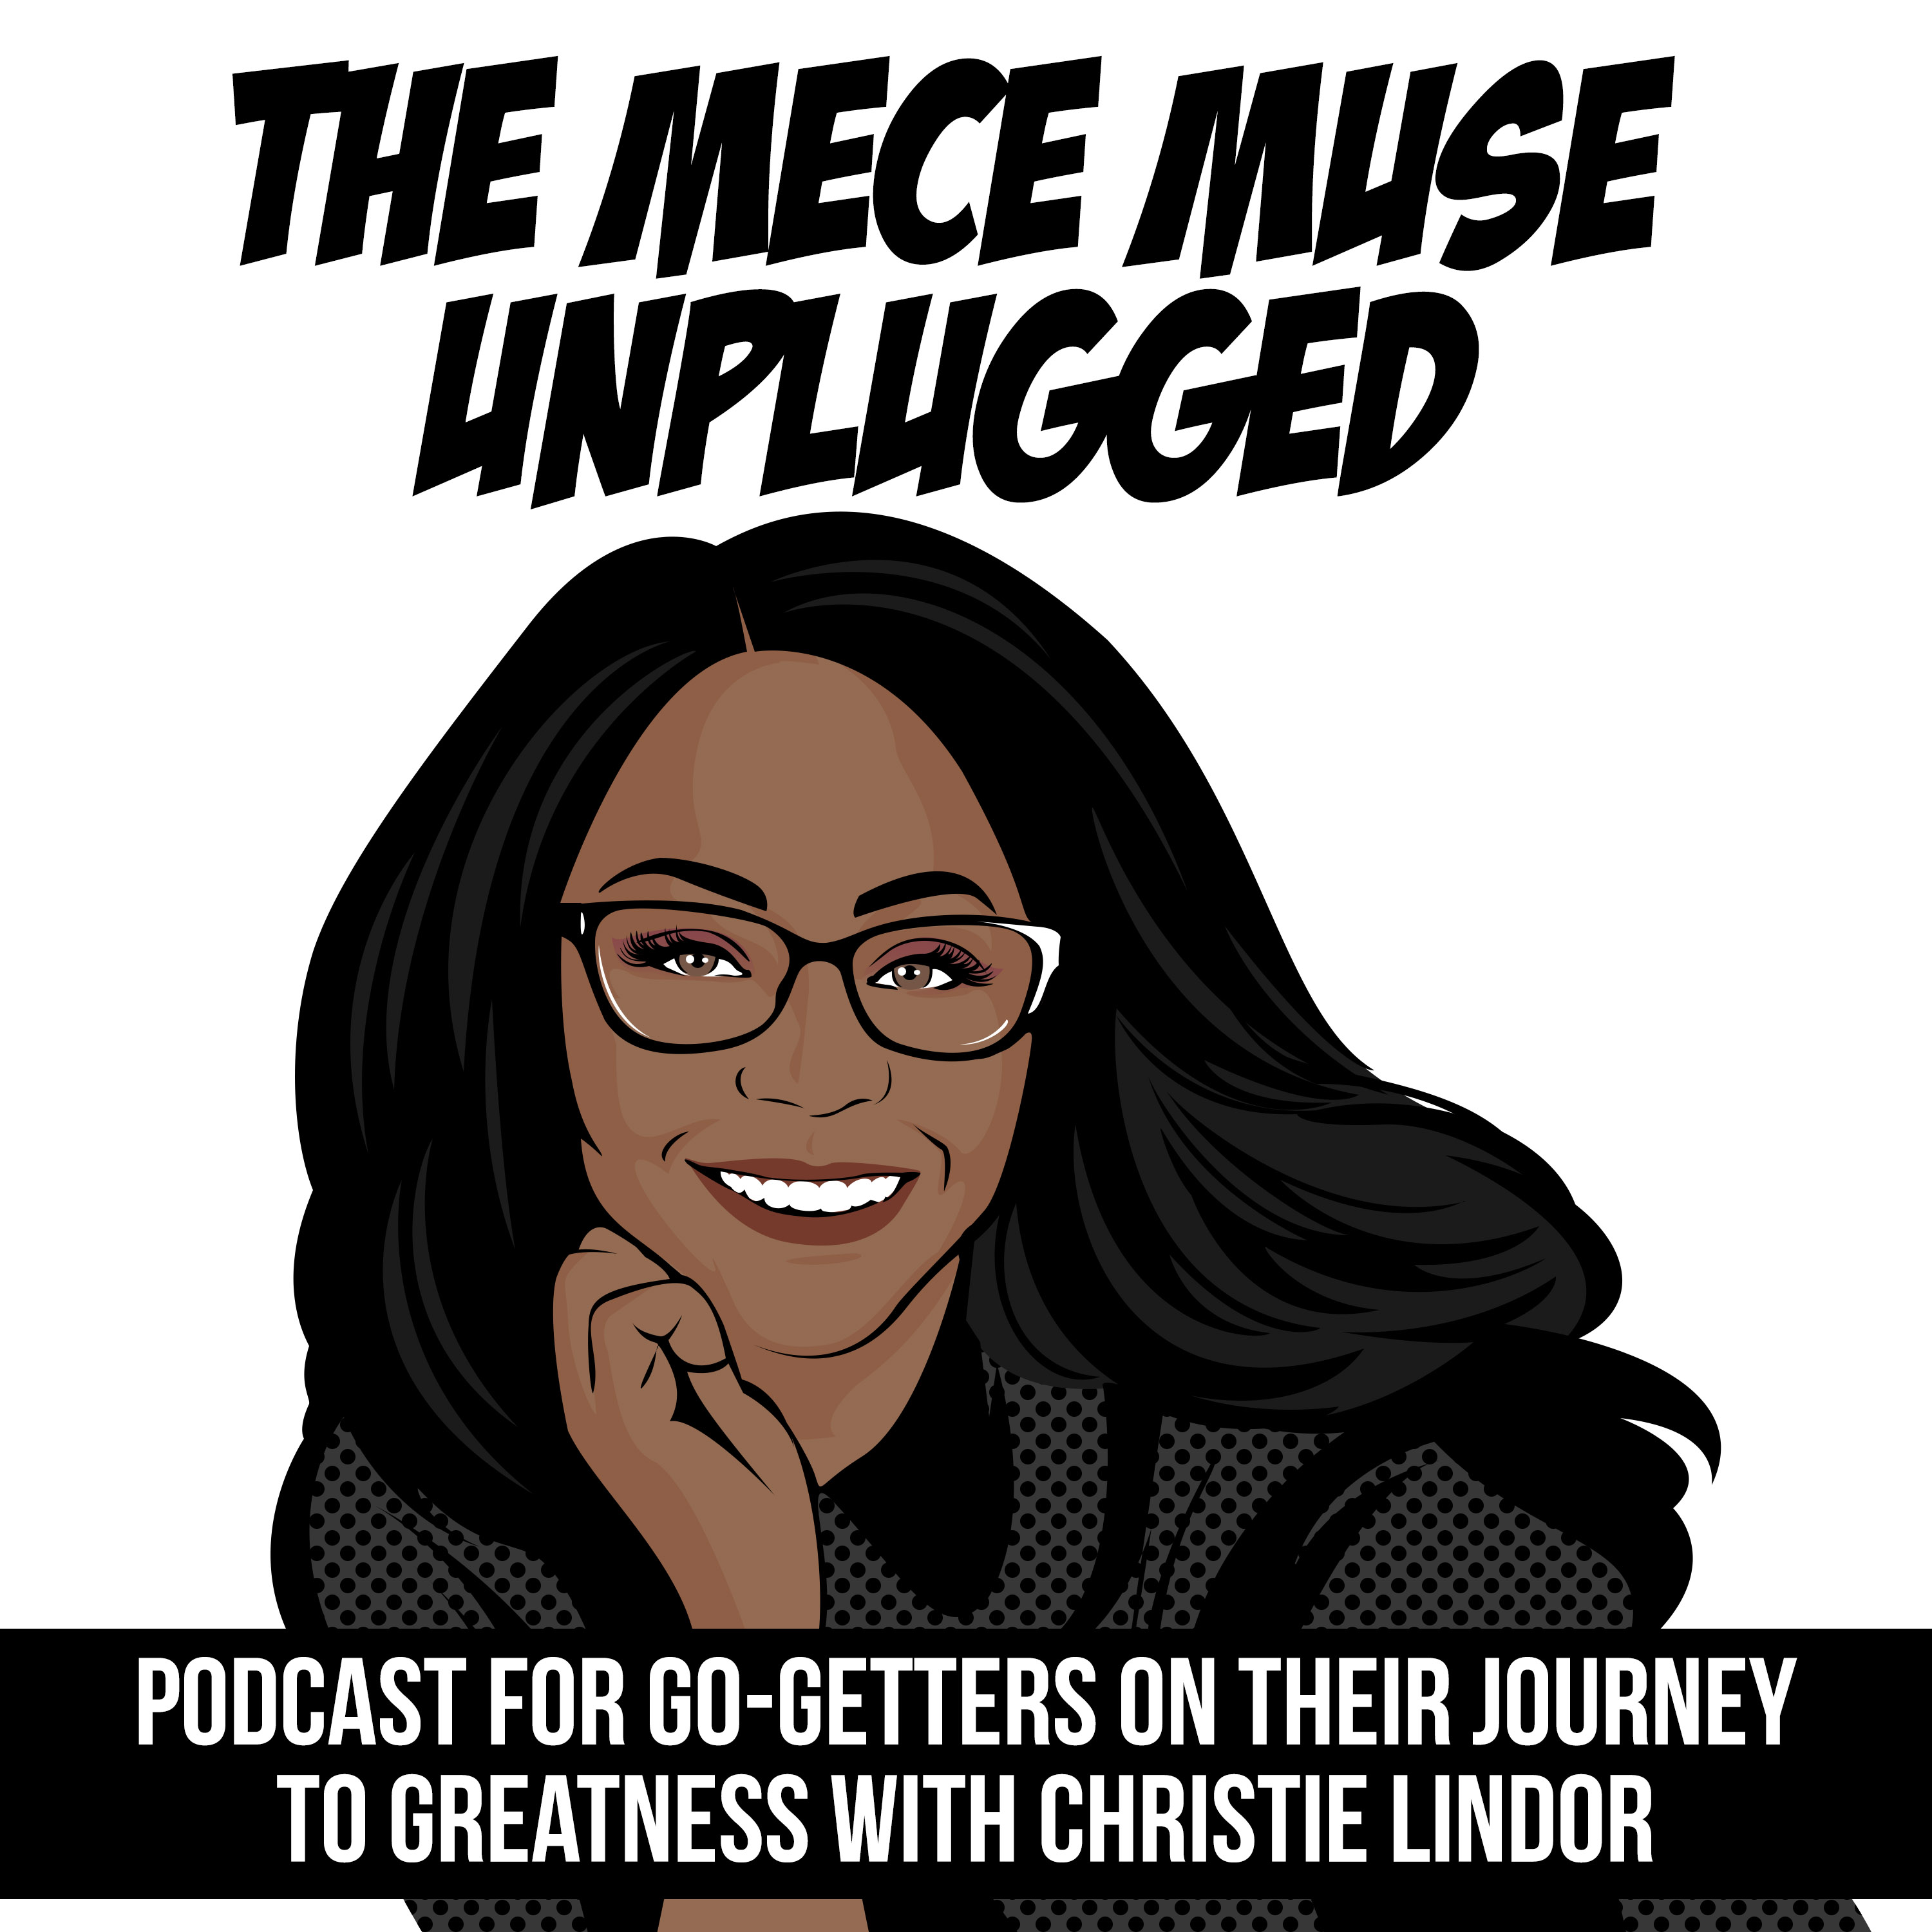 The MECE Muse Unplugged Podcast - Empowering Go-Getters on Their Journey to Greatness